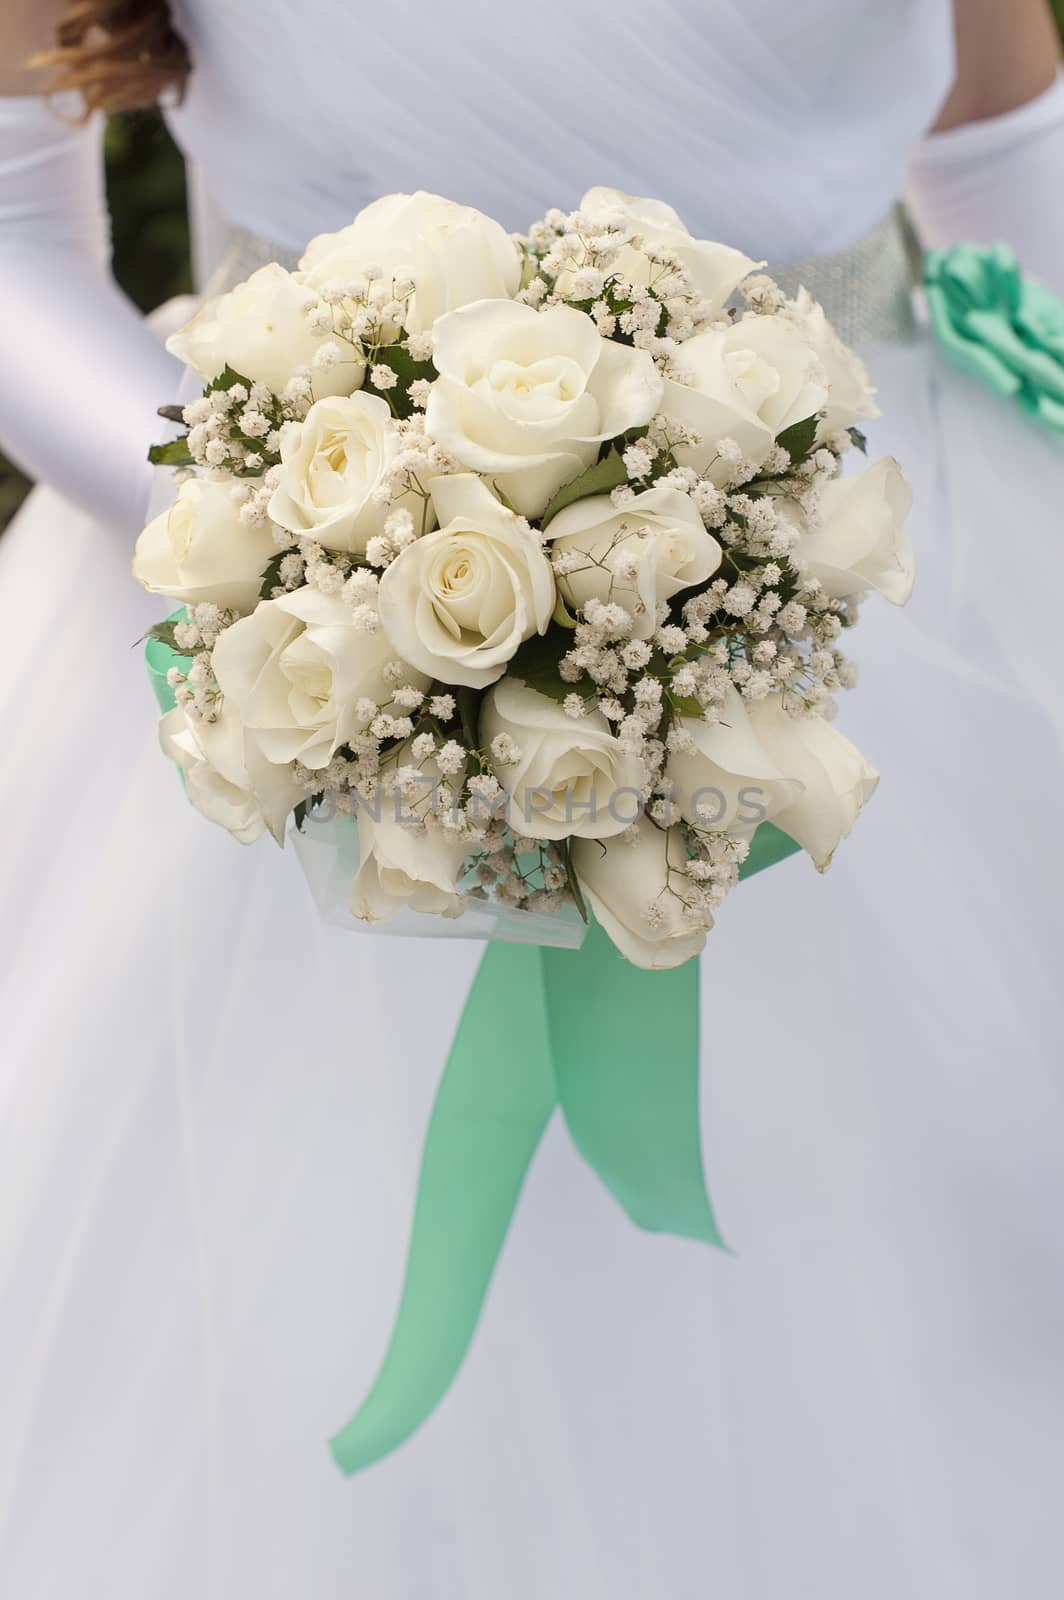 Bride Holding beautiful Bouquet of White Roses by timonko